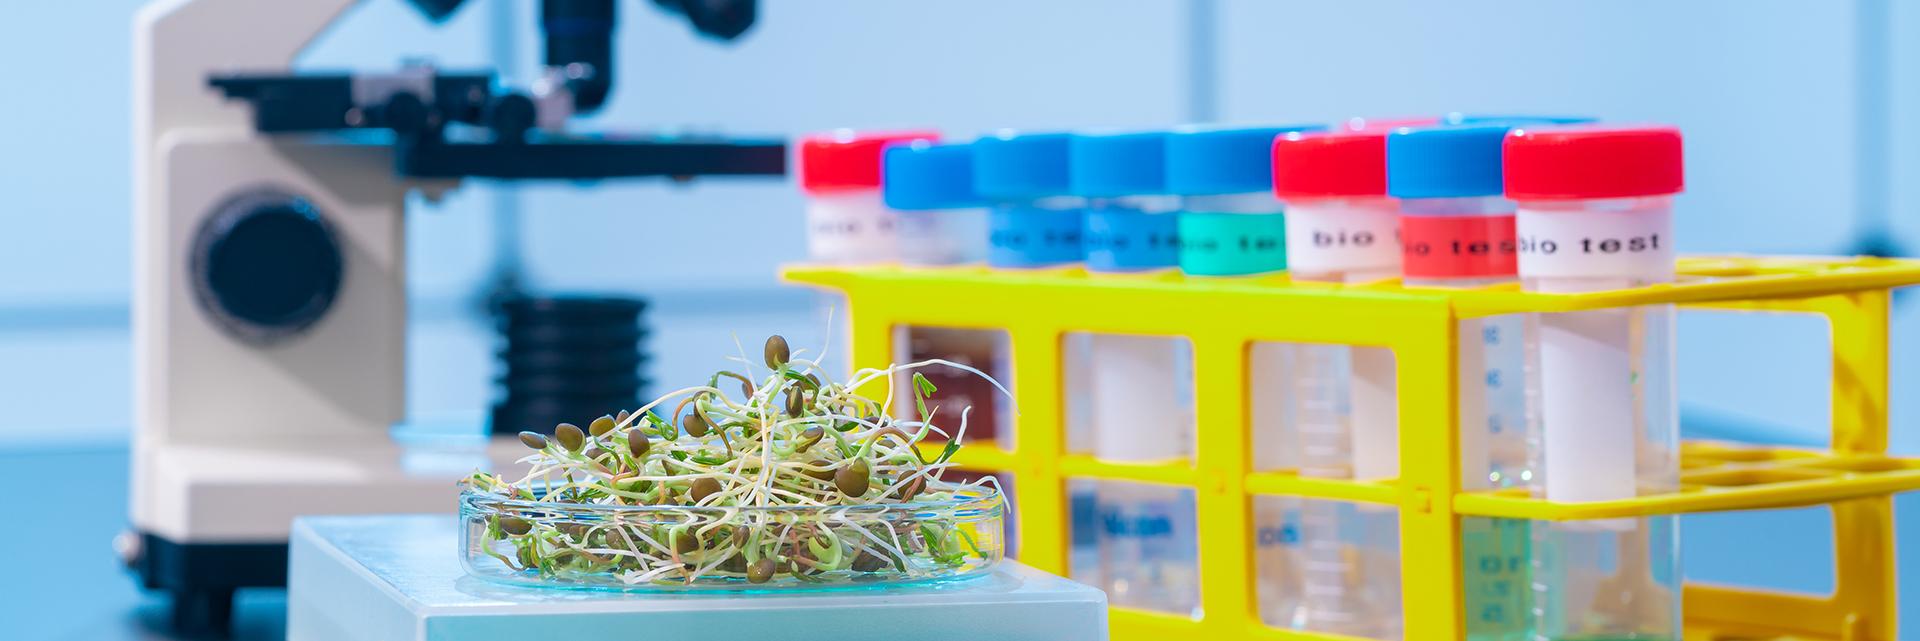 Sprouts on petri dish, microscope and different coloured test tubes